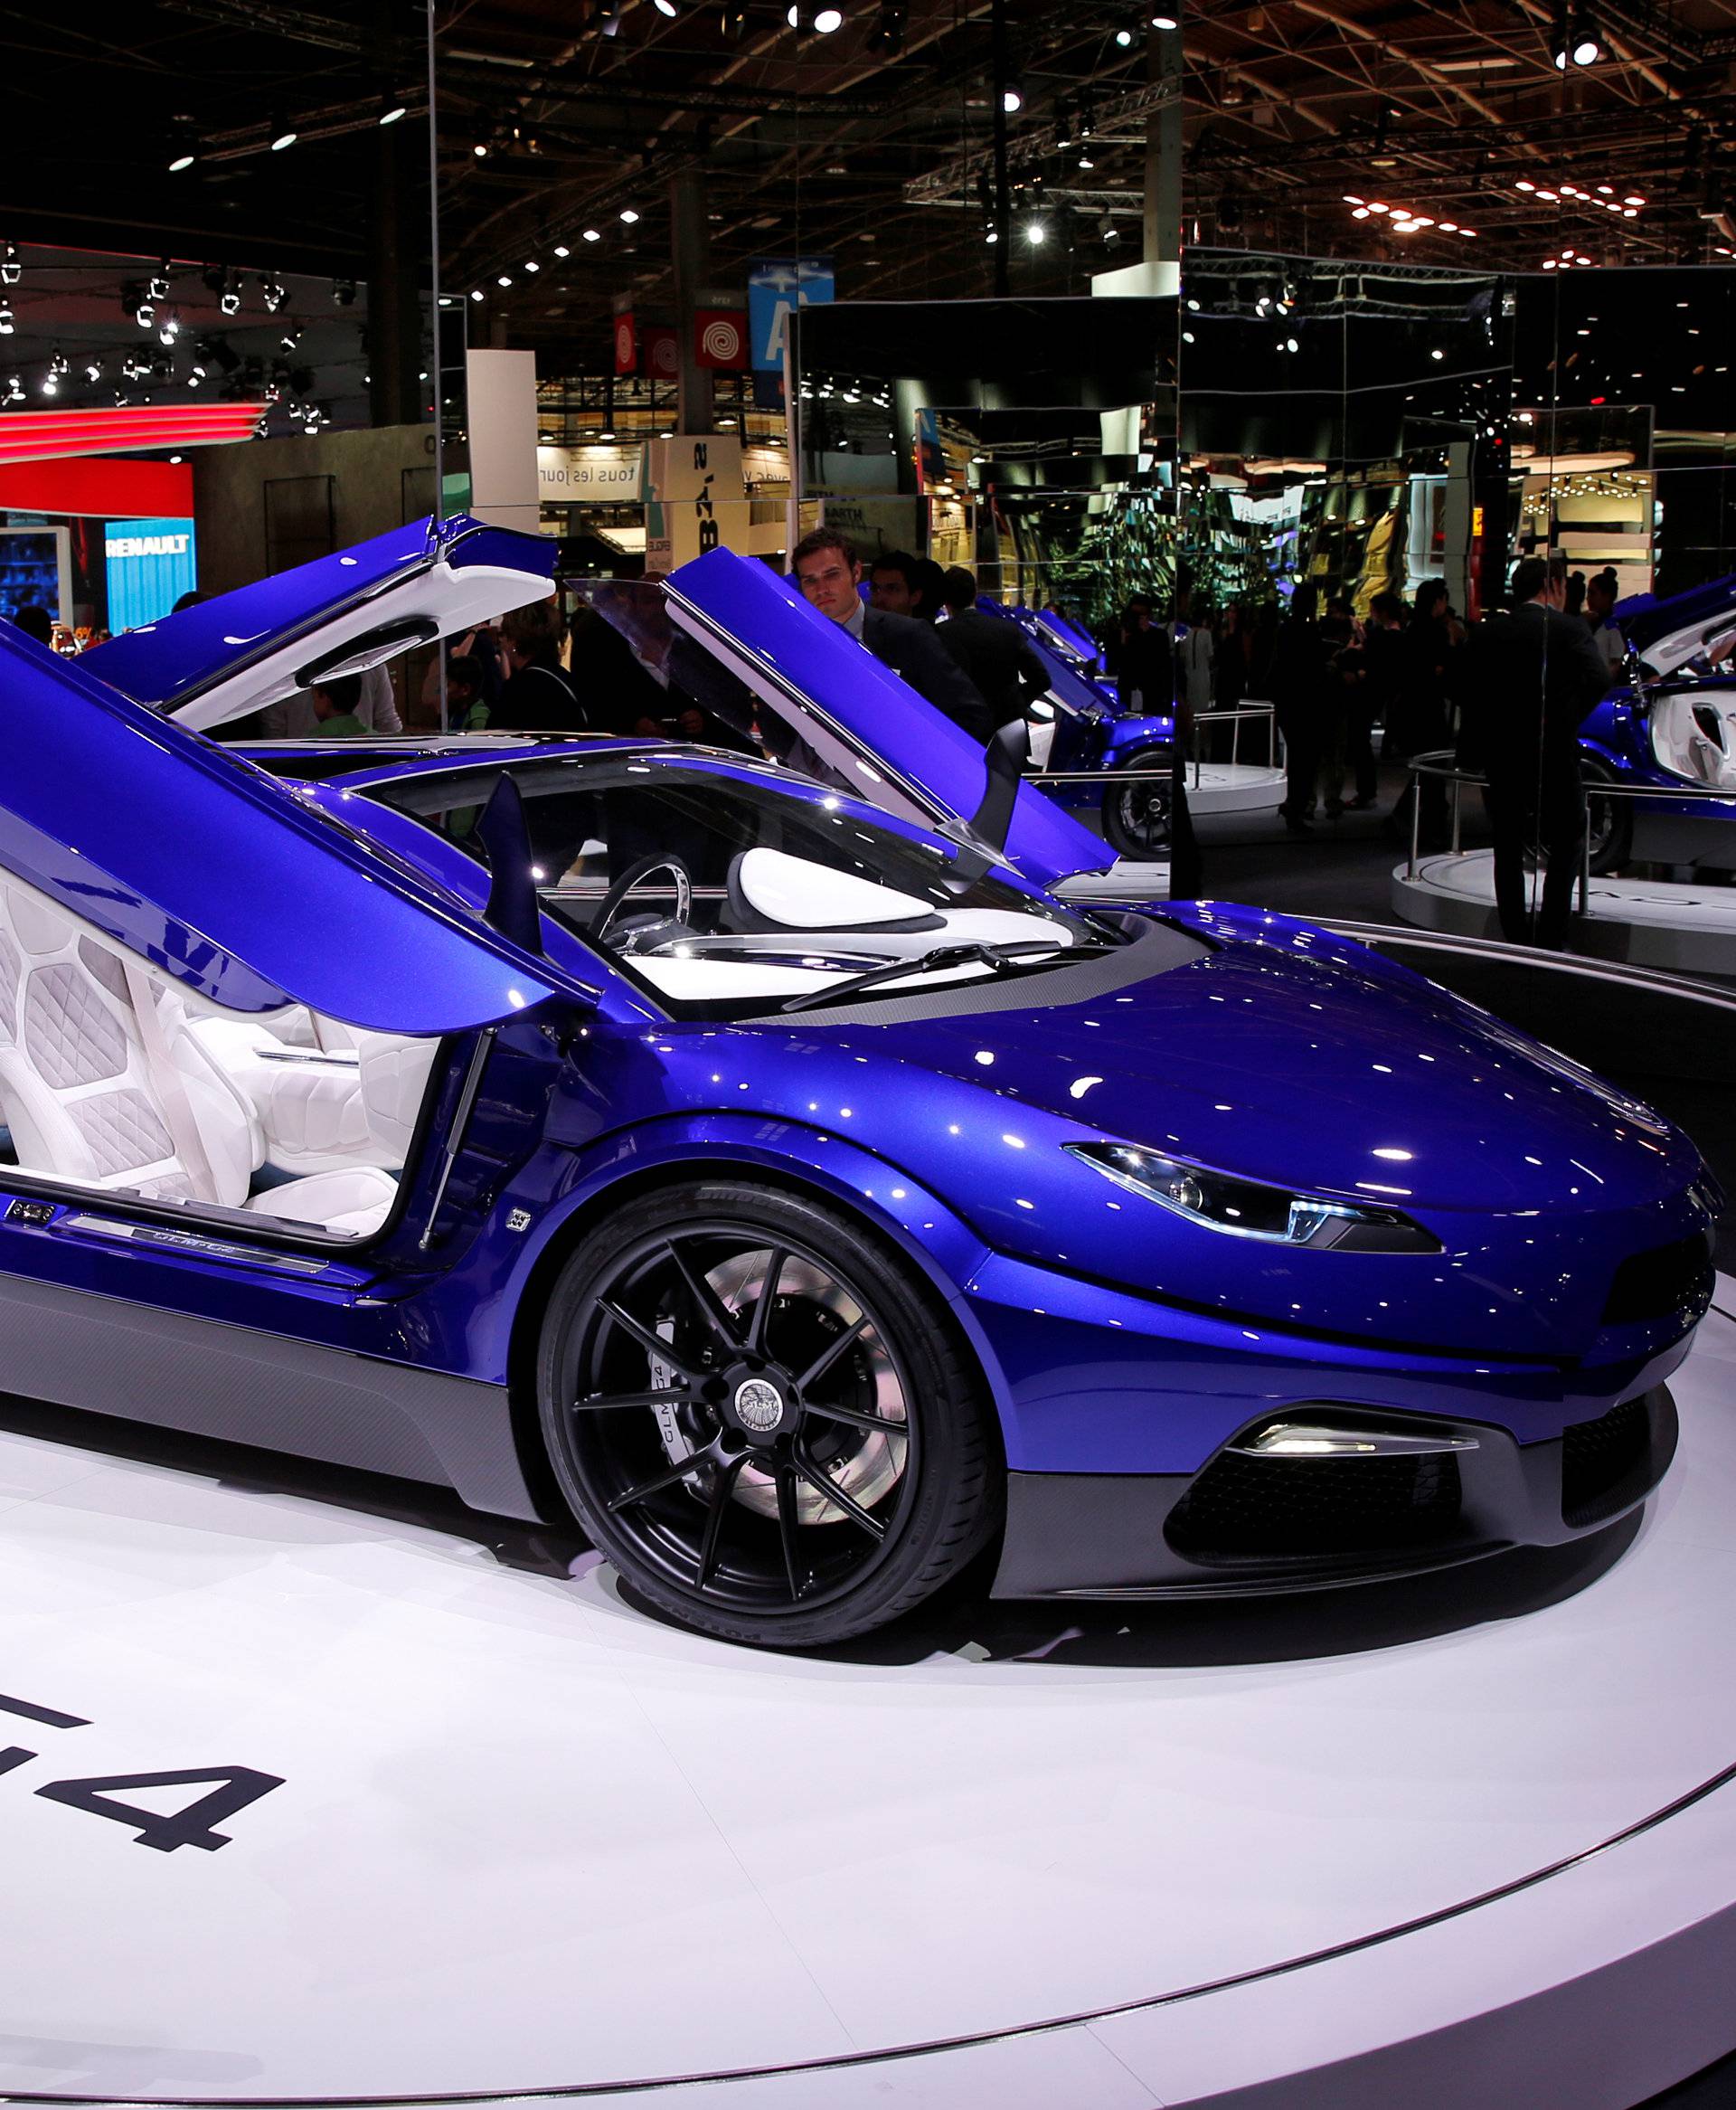 The sports car with electric drive Roadyacht GLM-G4 is displayed on media day at the Paris auto show, in Paris